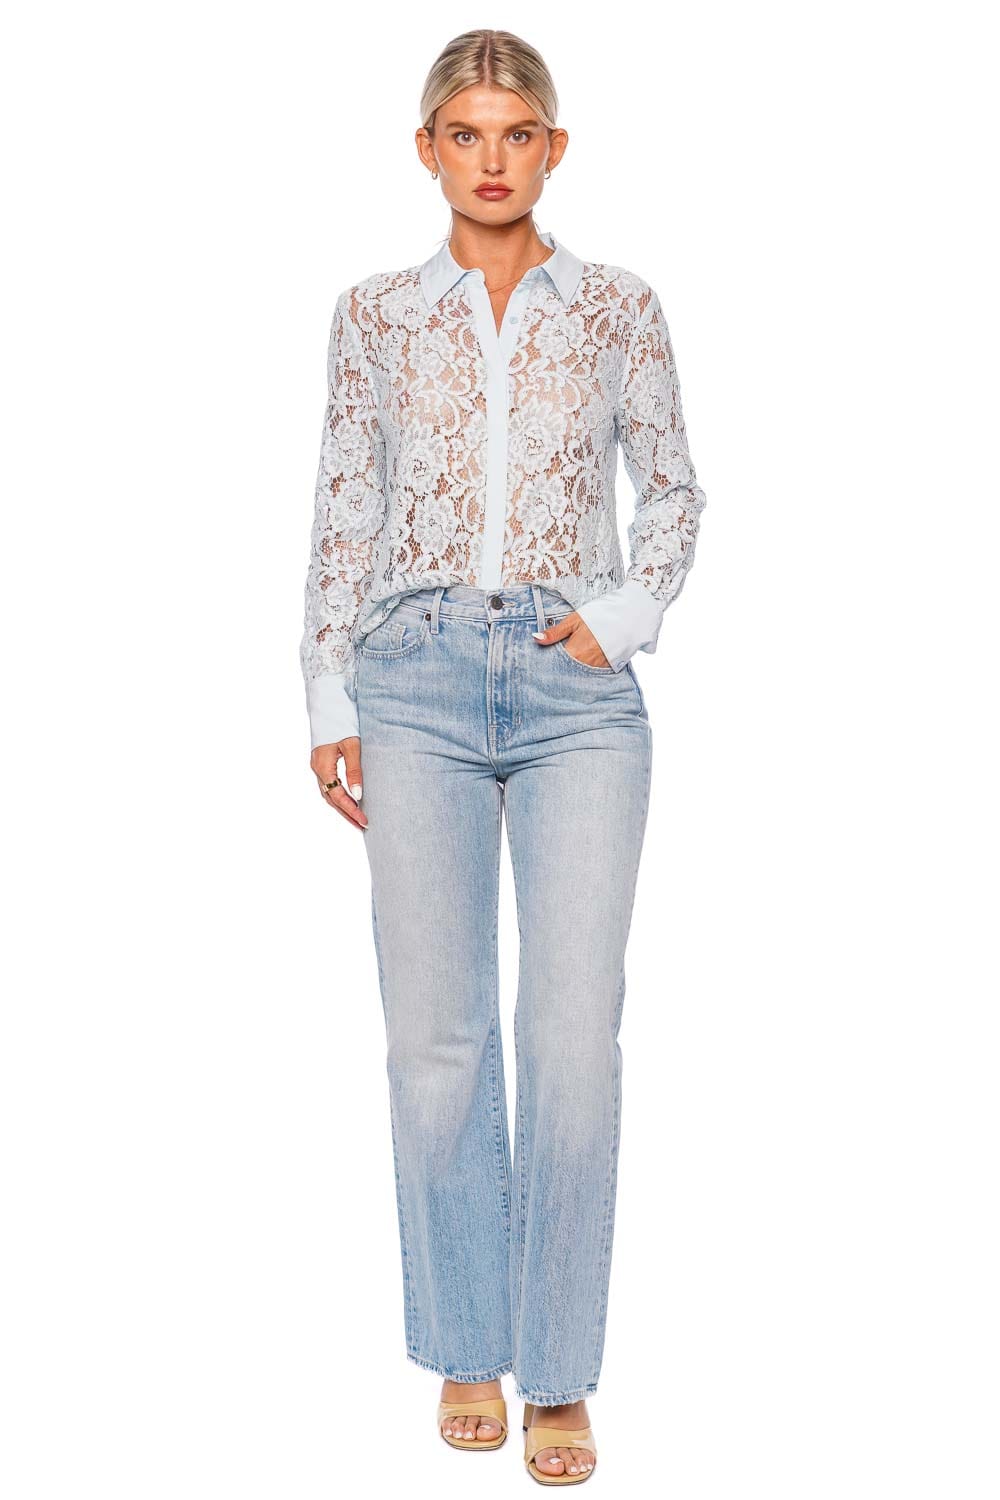 L'AGENCE MAIA LACE BUTTONDOWN BLS 40570KTS ICE WATER